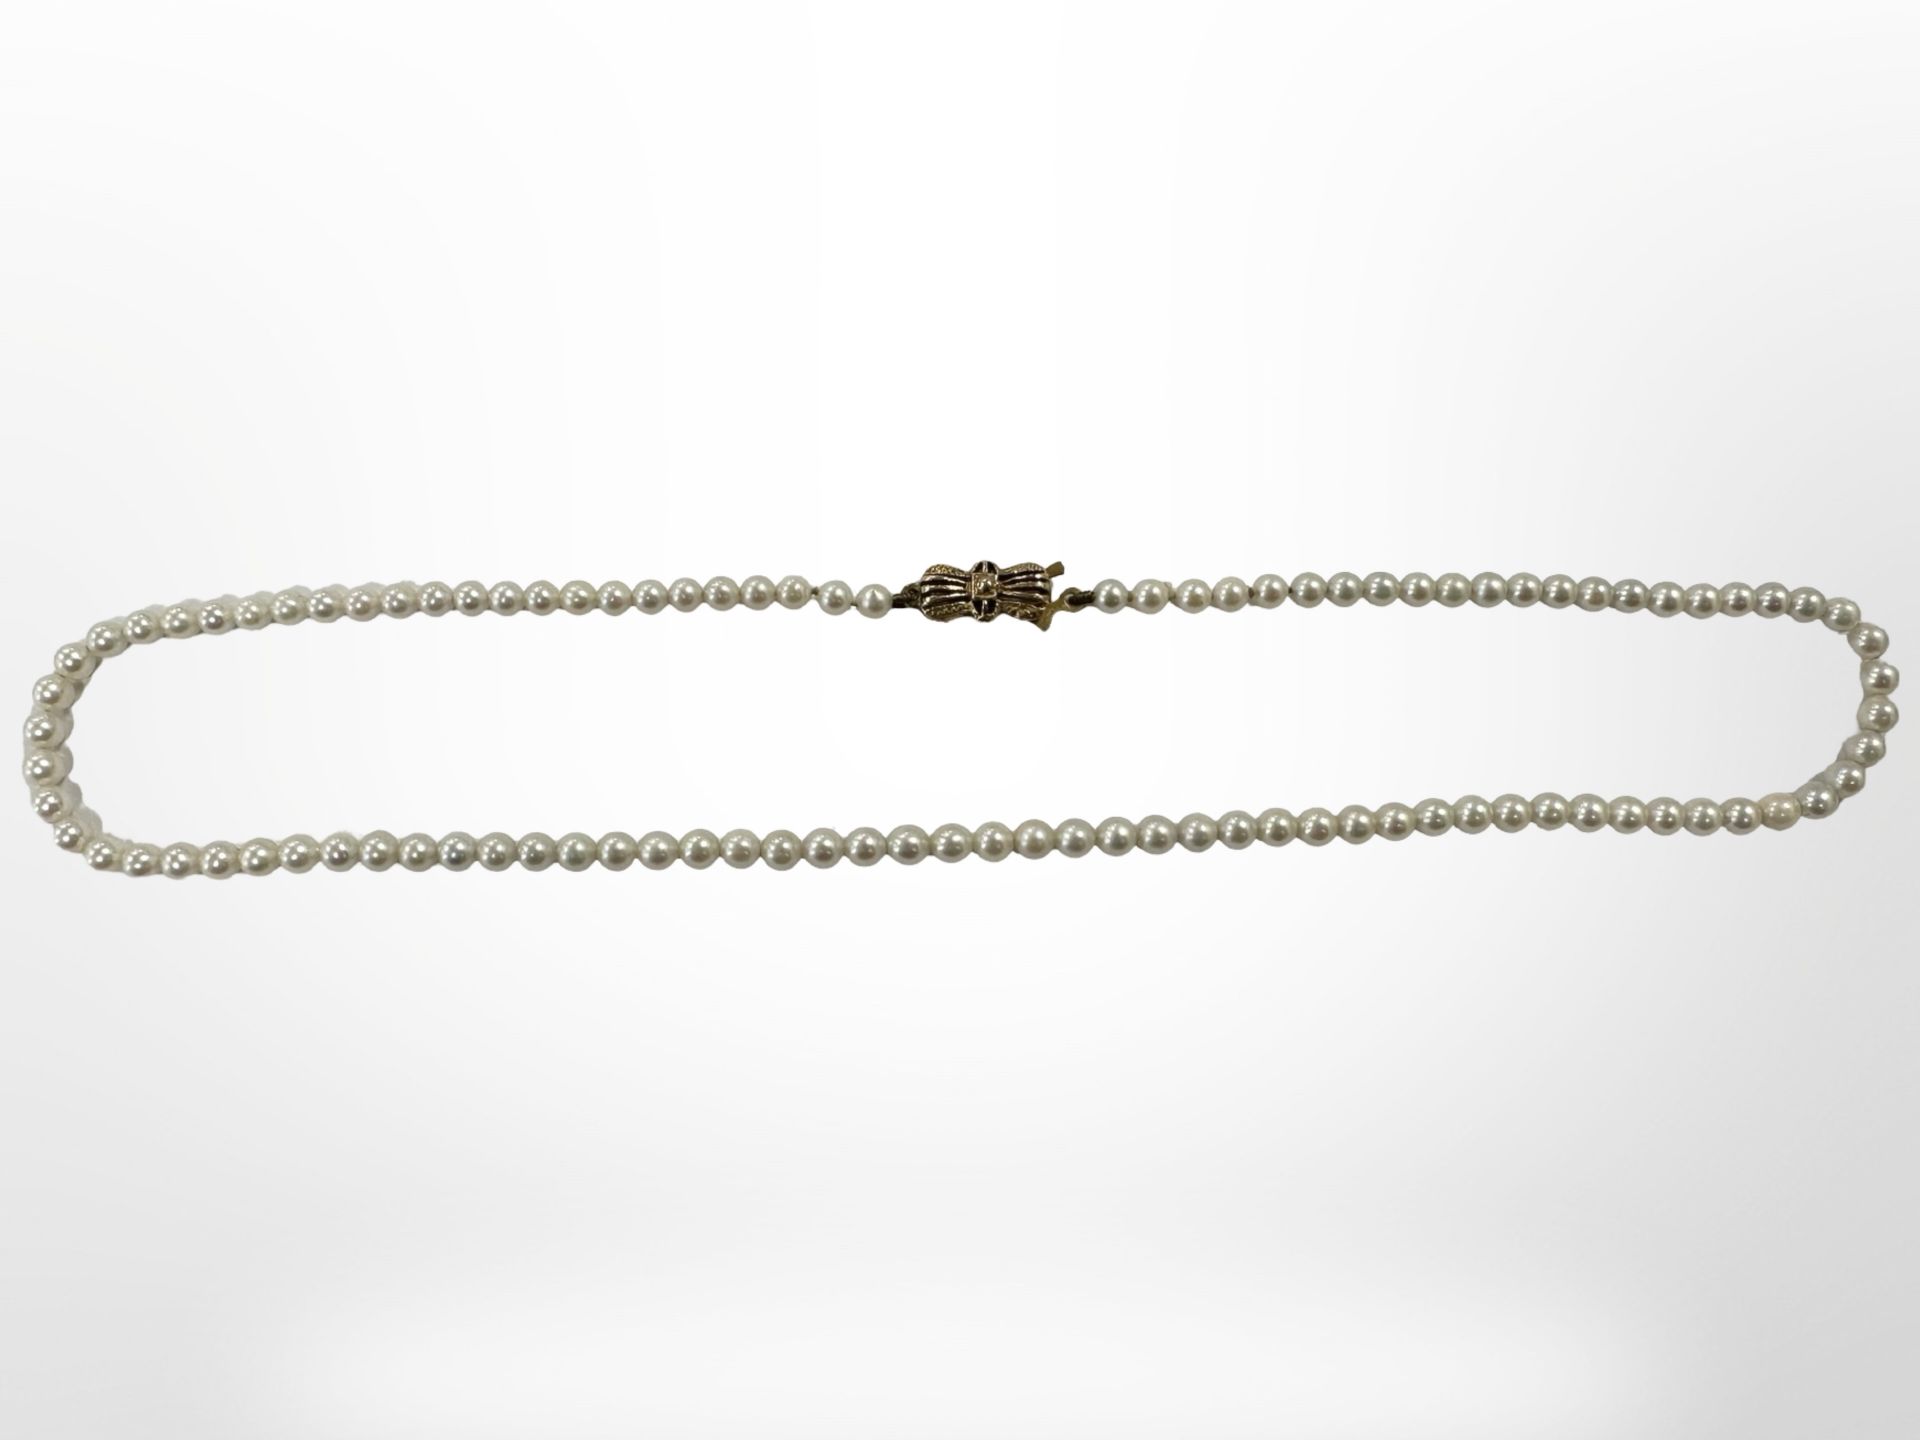 A single-stand pearl necklace with 9ct gold clasp,